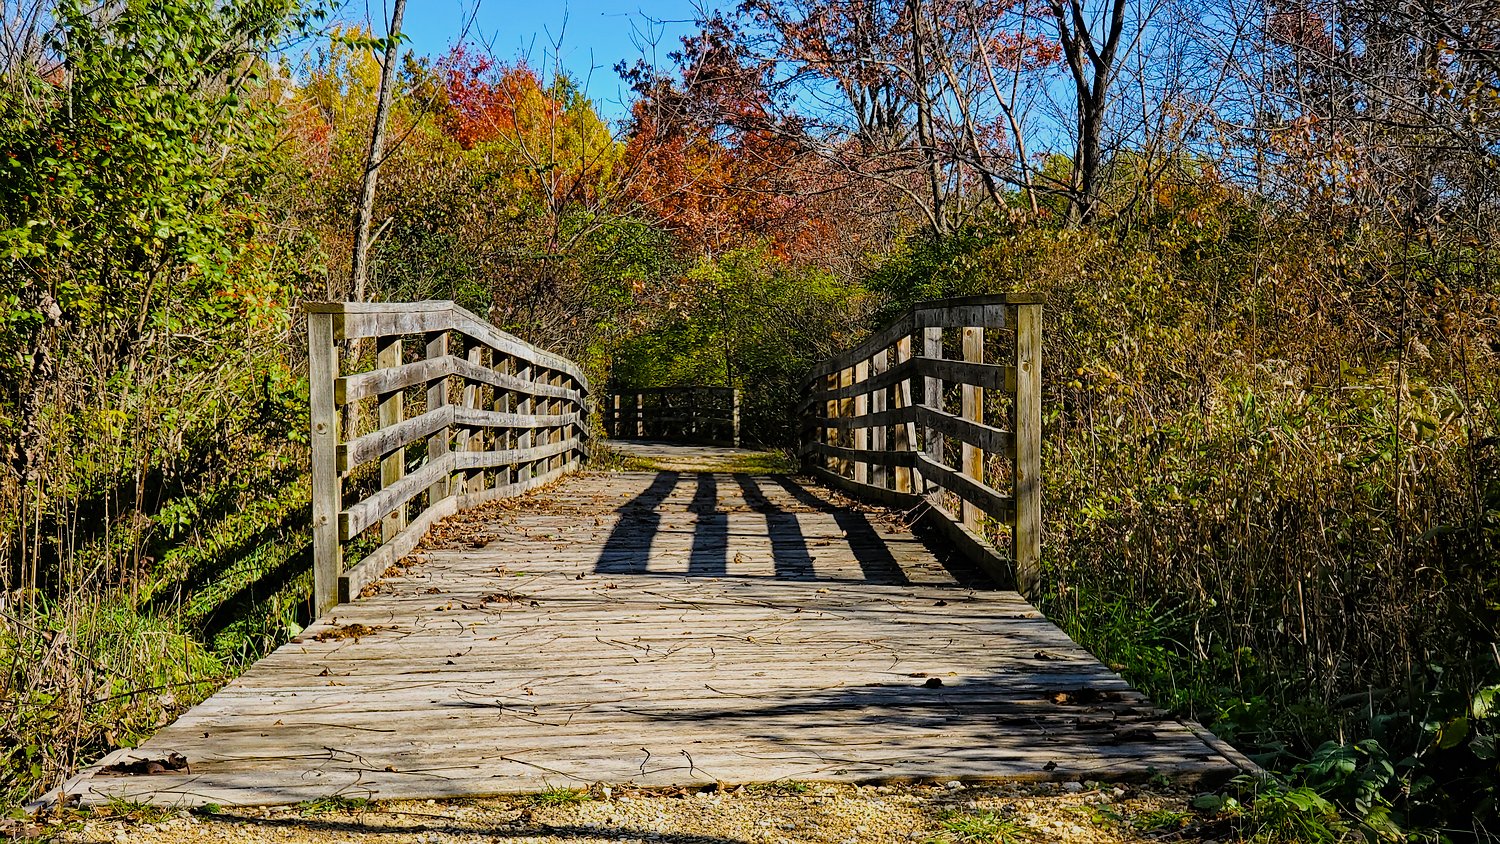 Bridges over the stream beds at Rush Creek Conservation Area.